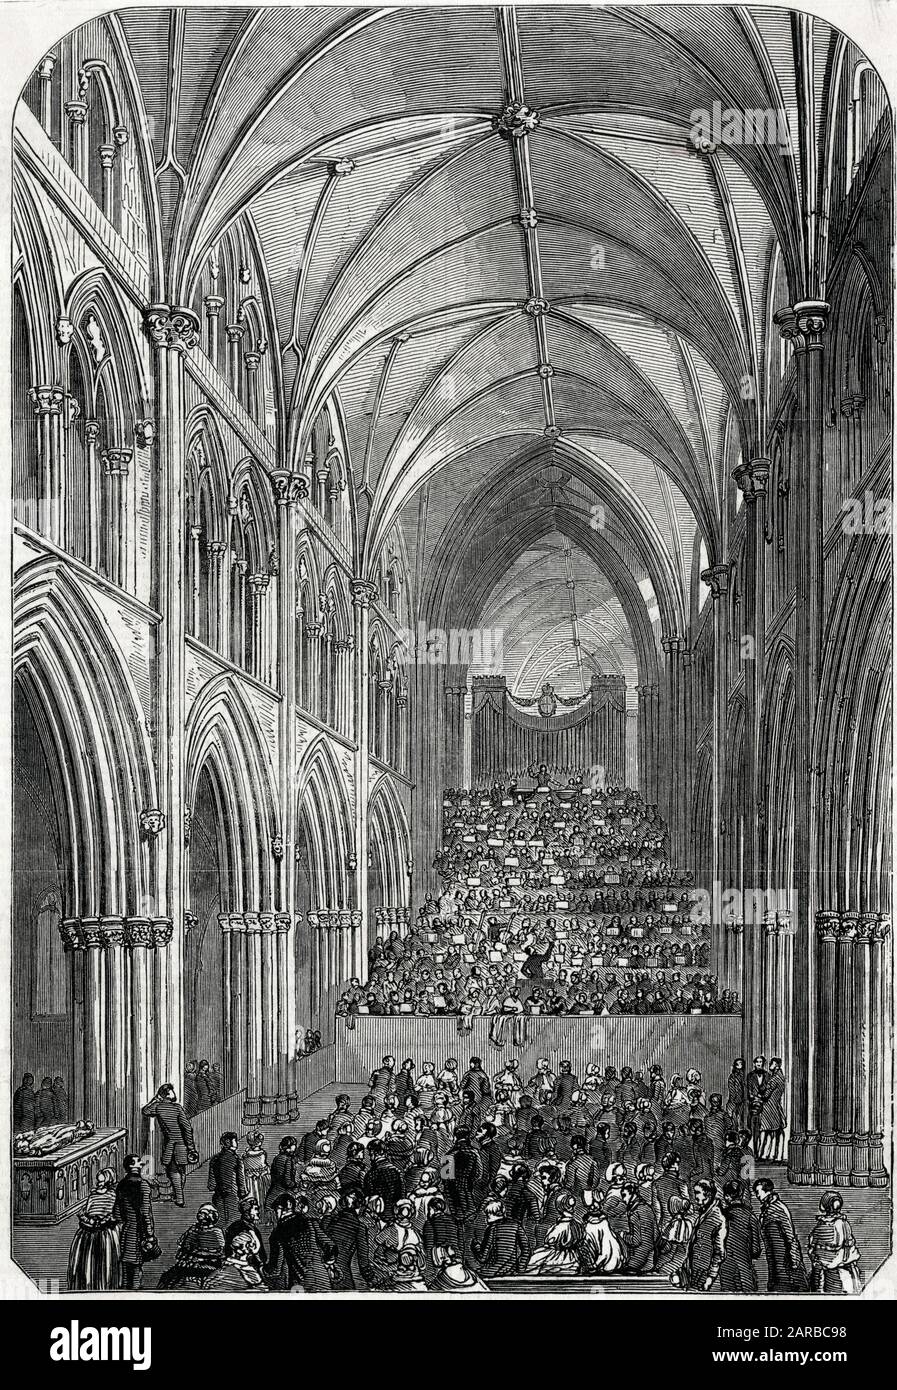 The 'Three Choirs' music festival held in Worcester Cathedral.       Date: 1848 Stock Photo